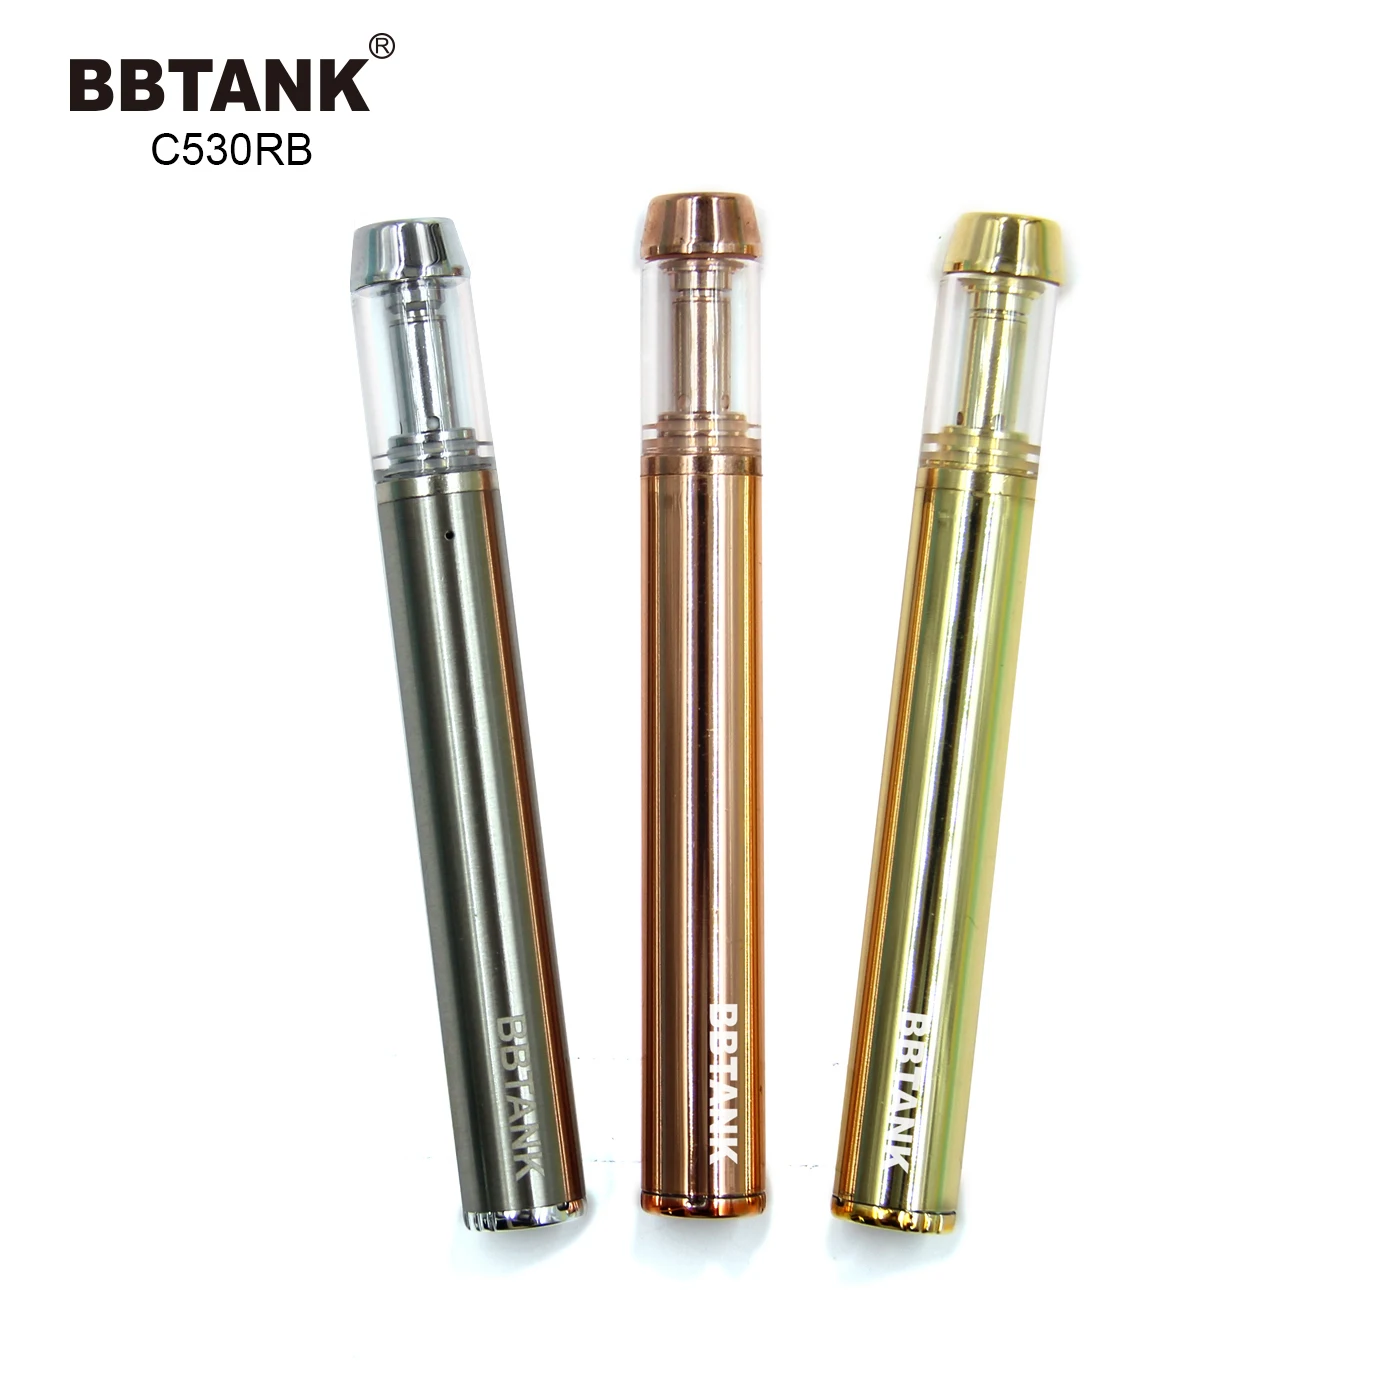 2019 Canada best selling ceramic coil 530mAh battery disposable cbd oil vape pen with childproof packaging